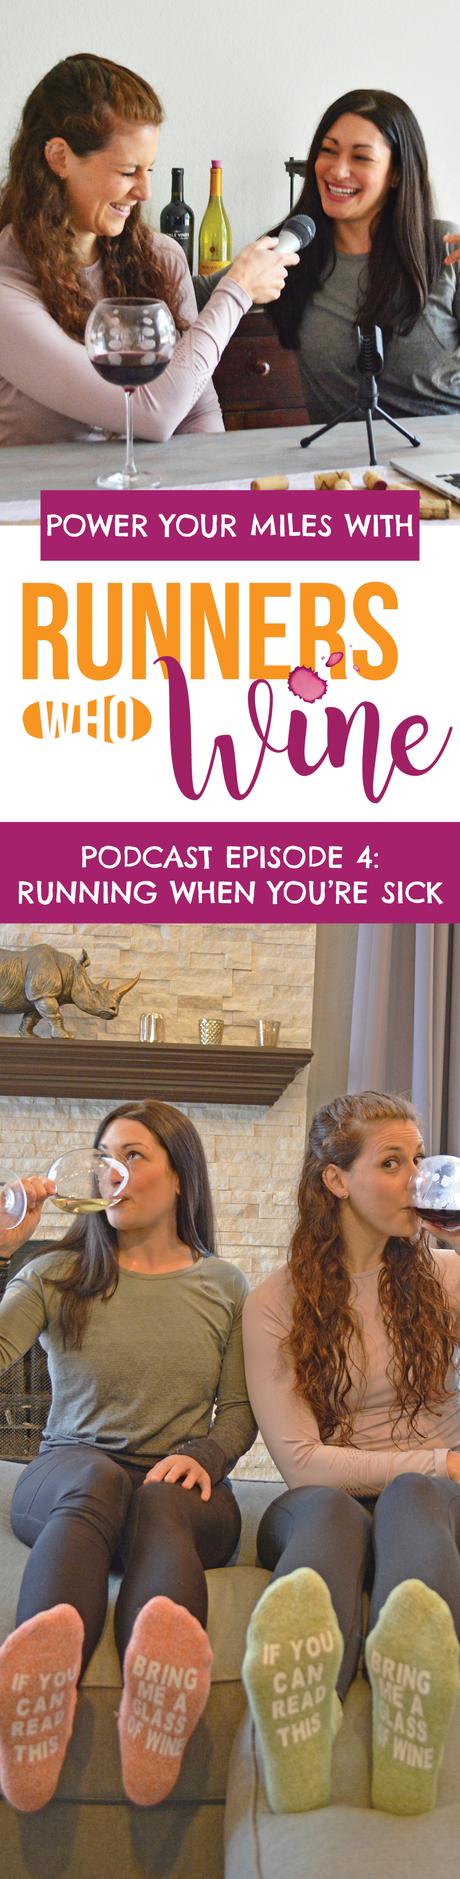 Runners Who Wine Episode 4: Running When You’re Sick